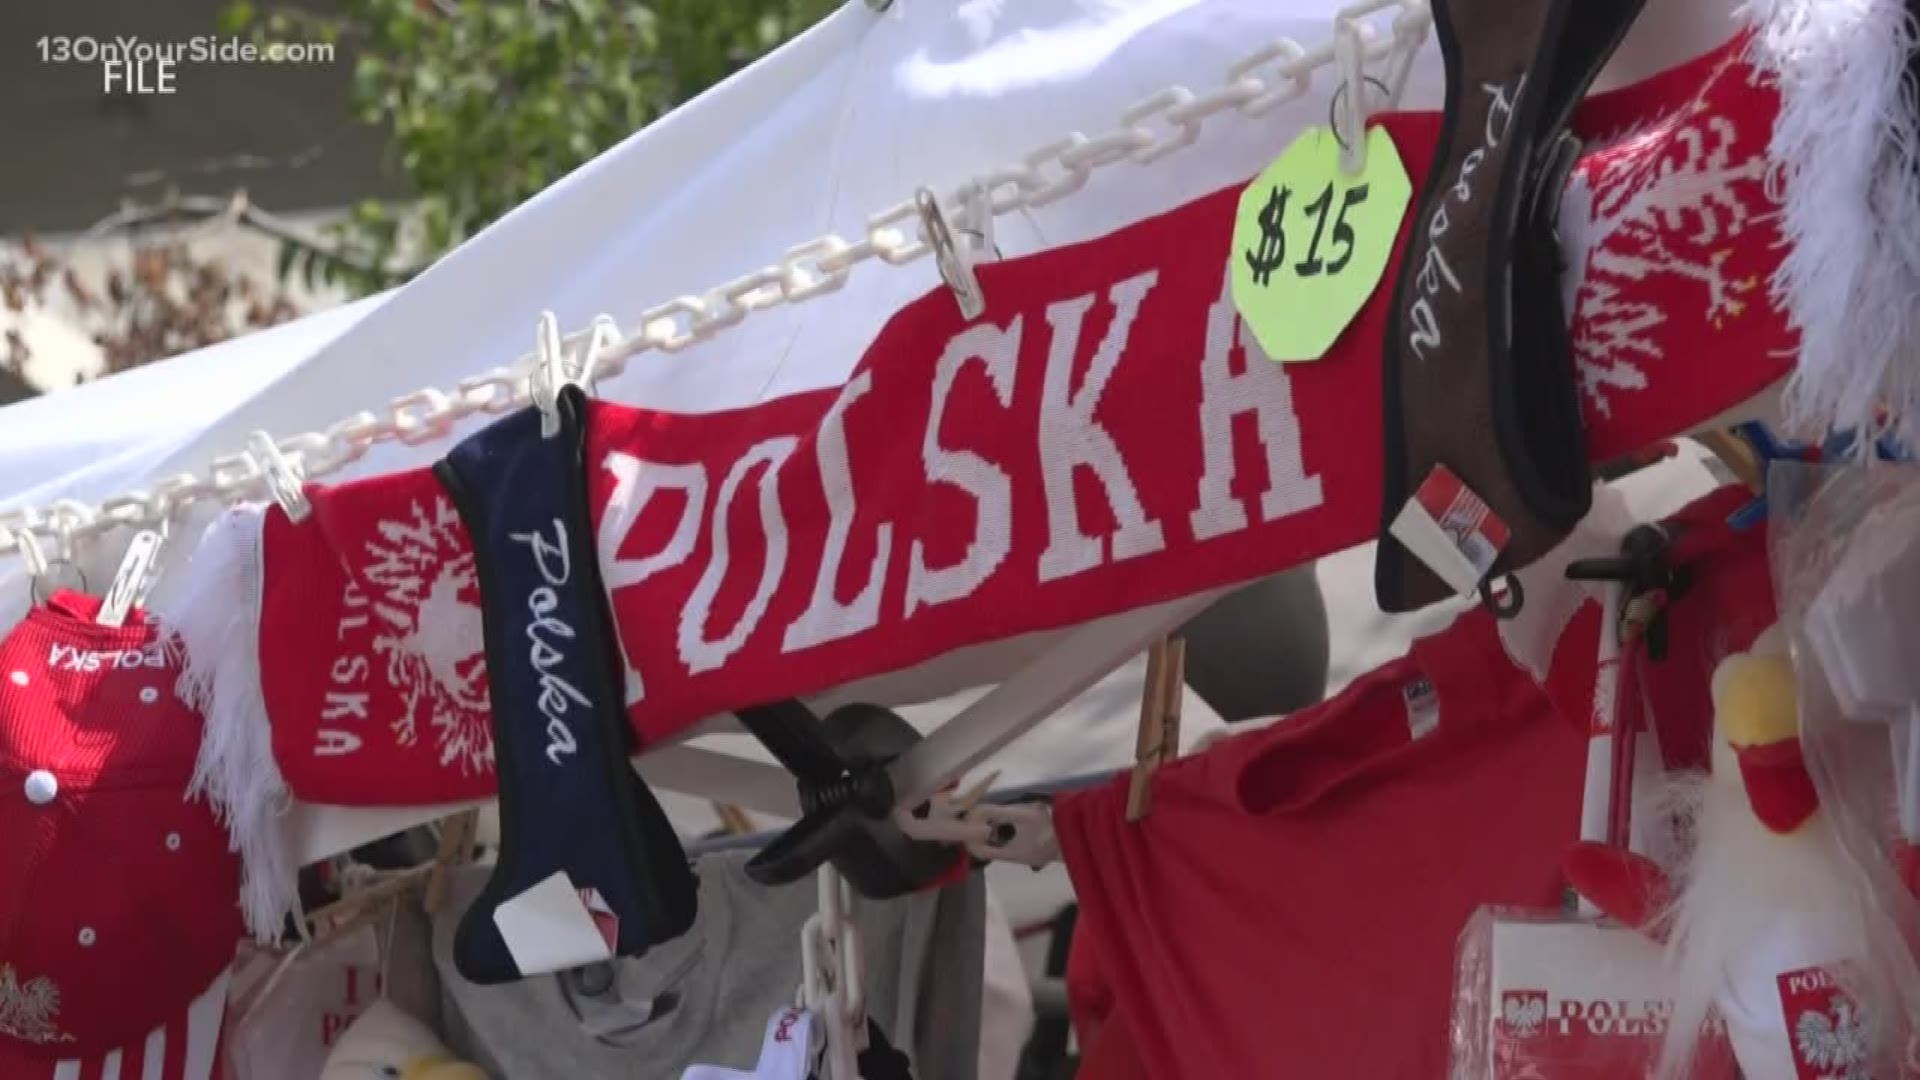 The 40th Annual Polish Festival kicks off in Rosa Parks Circle on Friday at 11 a.m. The three-day festival, held by the Polish Heritage Society, celebrates Polish culture, entertainment, food and drinks.